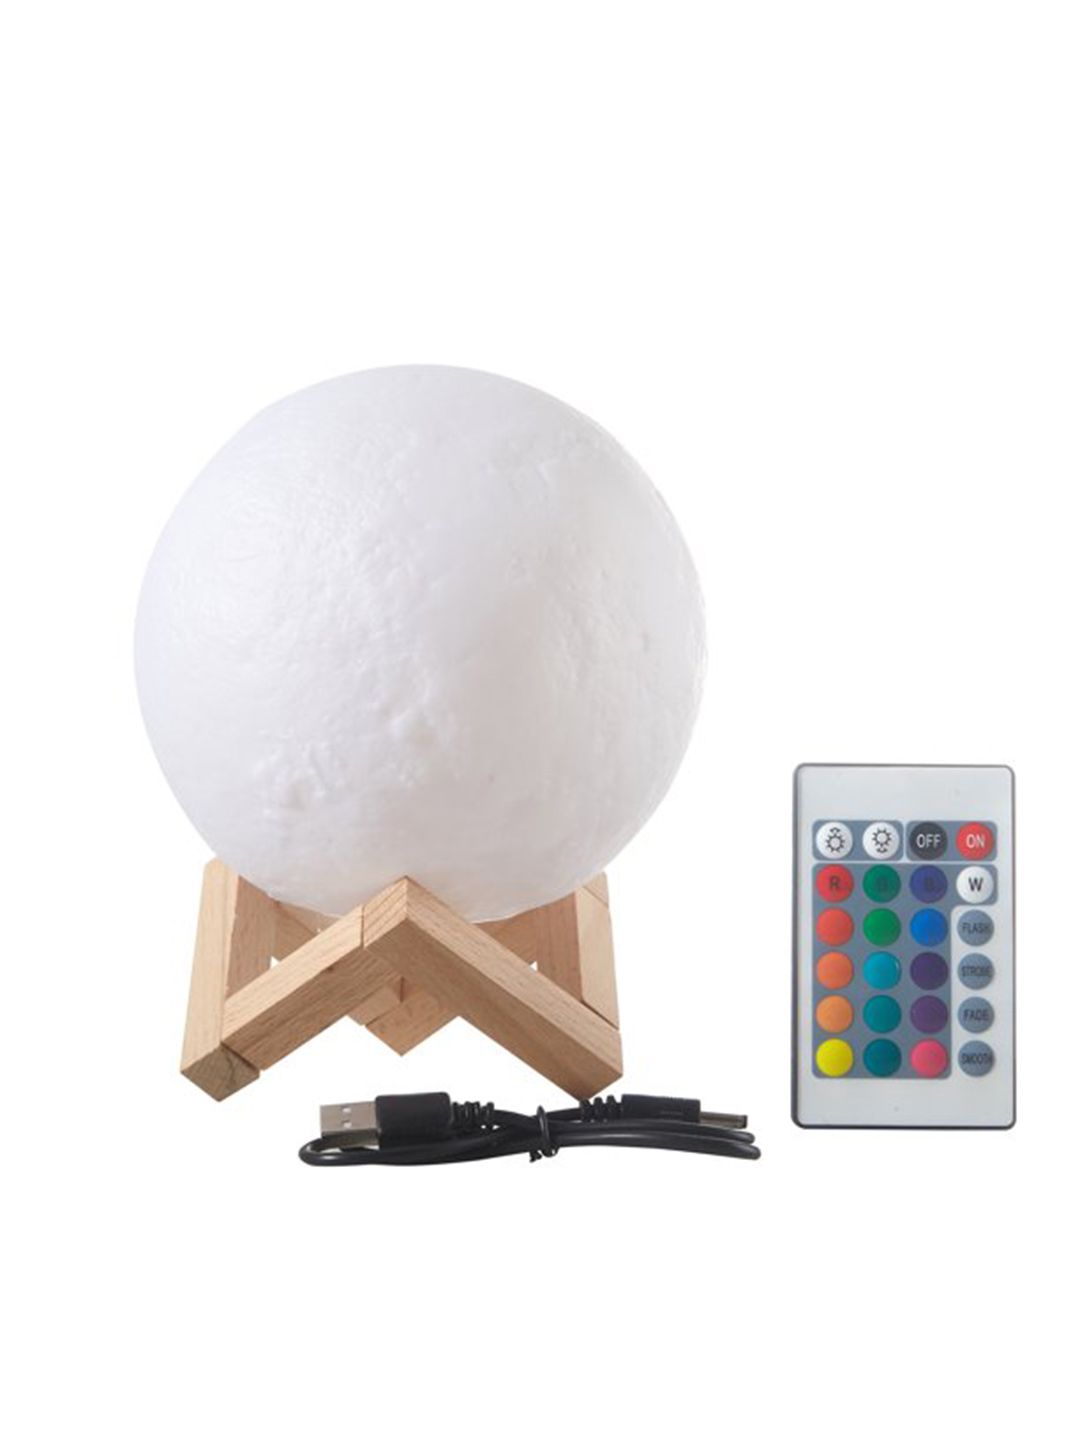 XERGY White 3D Moon Lamp Remote & Touch Control Price in India